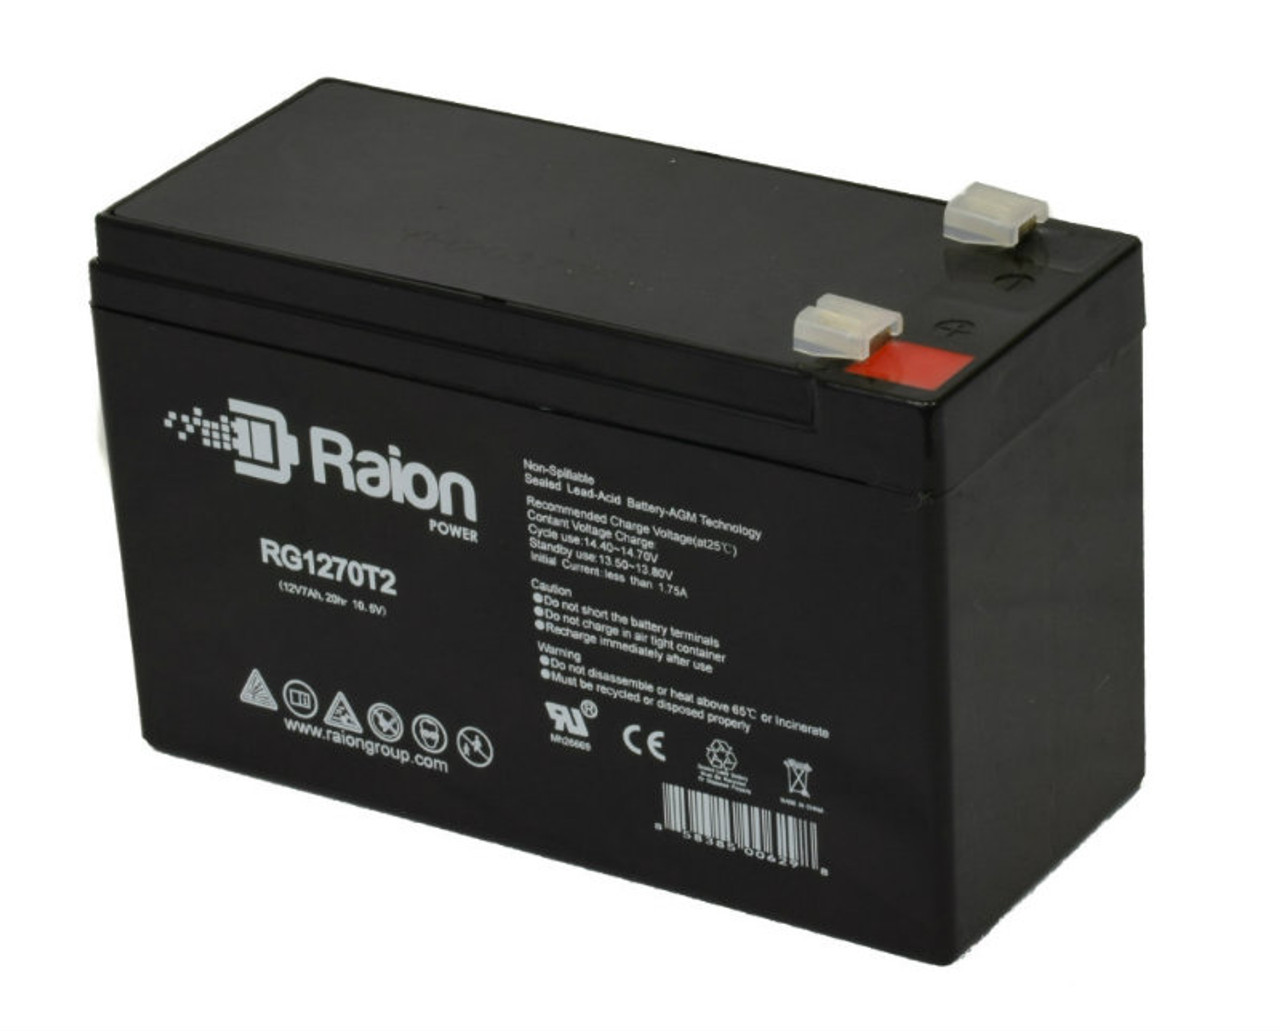 Raion Power RG1270T1 12V 7Ah Non-Spillable Replacement Battery for Vision 6FM7.2